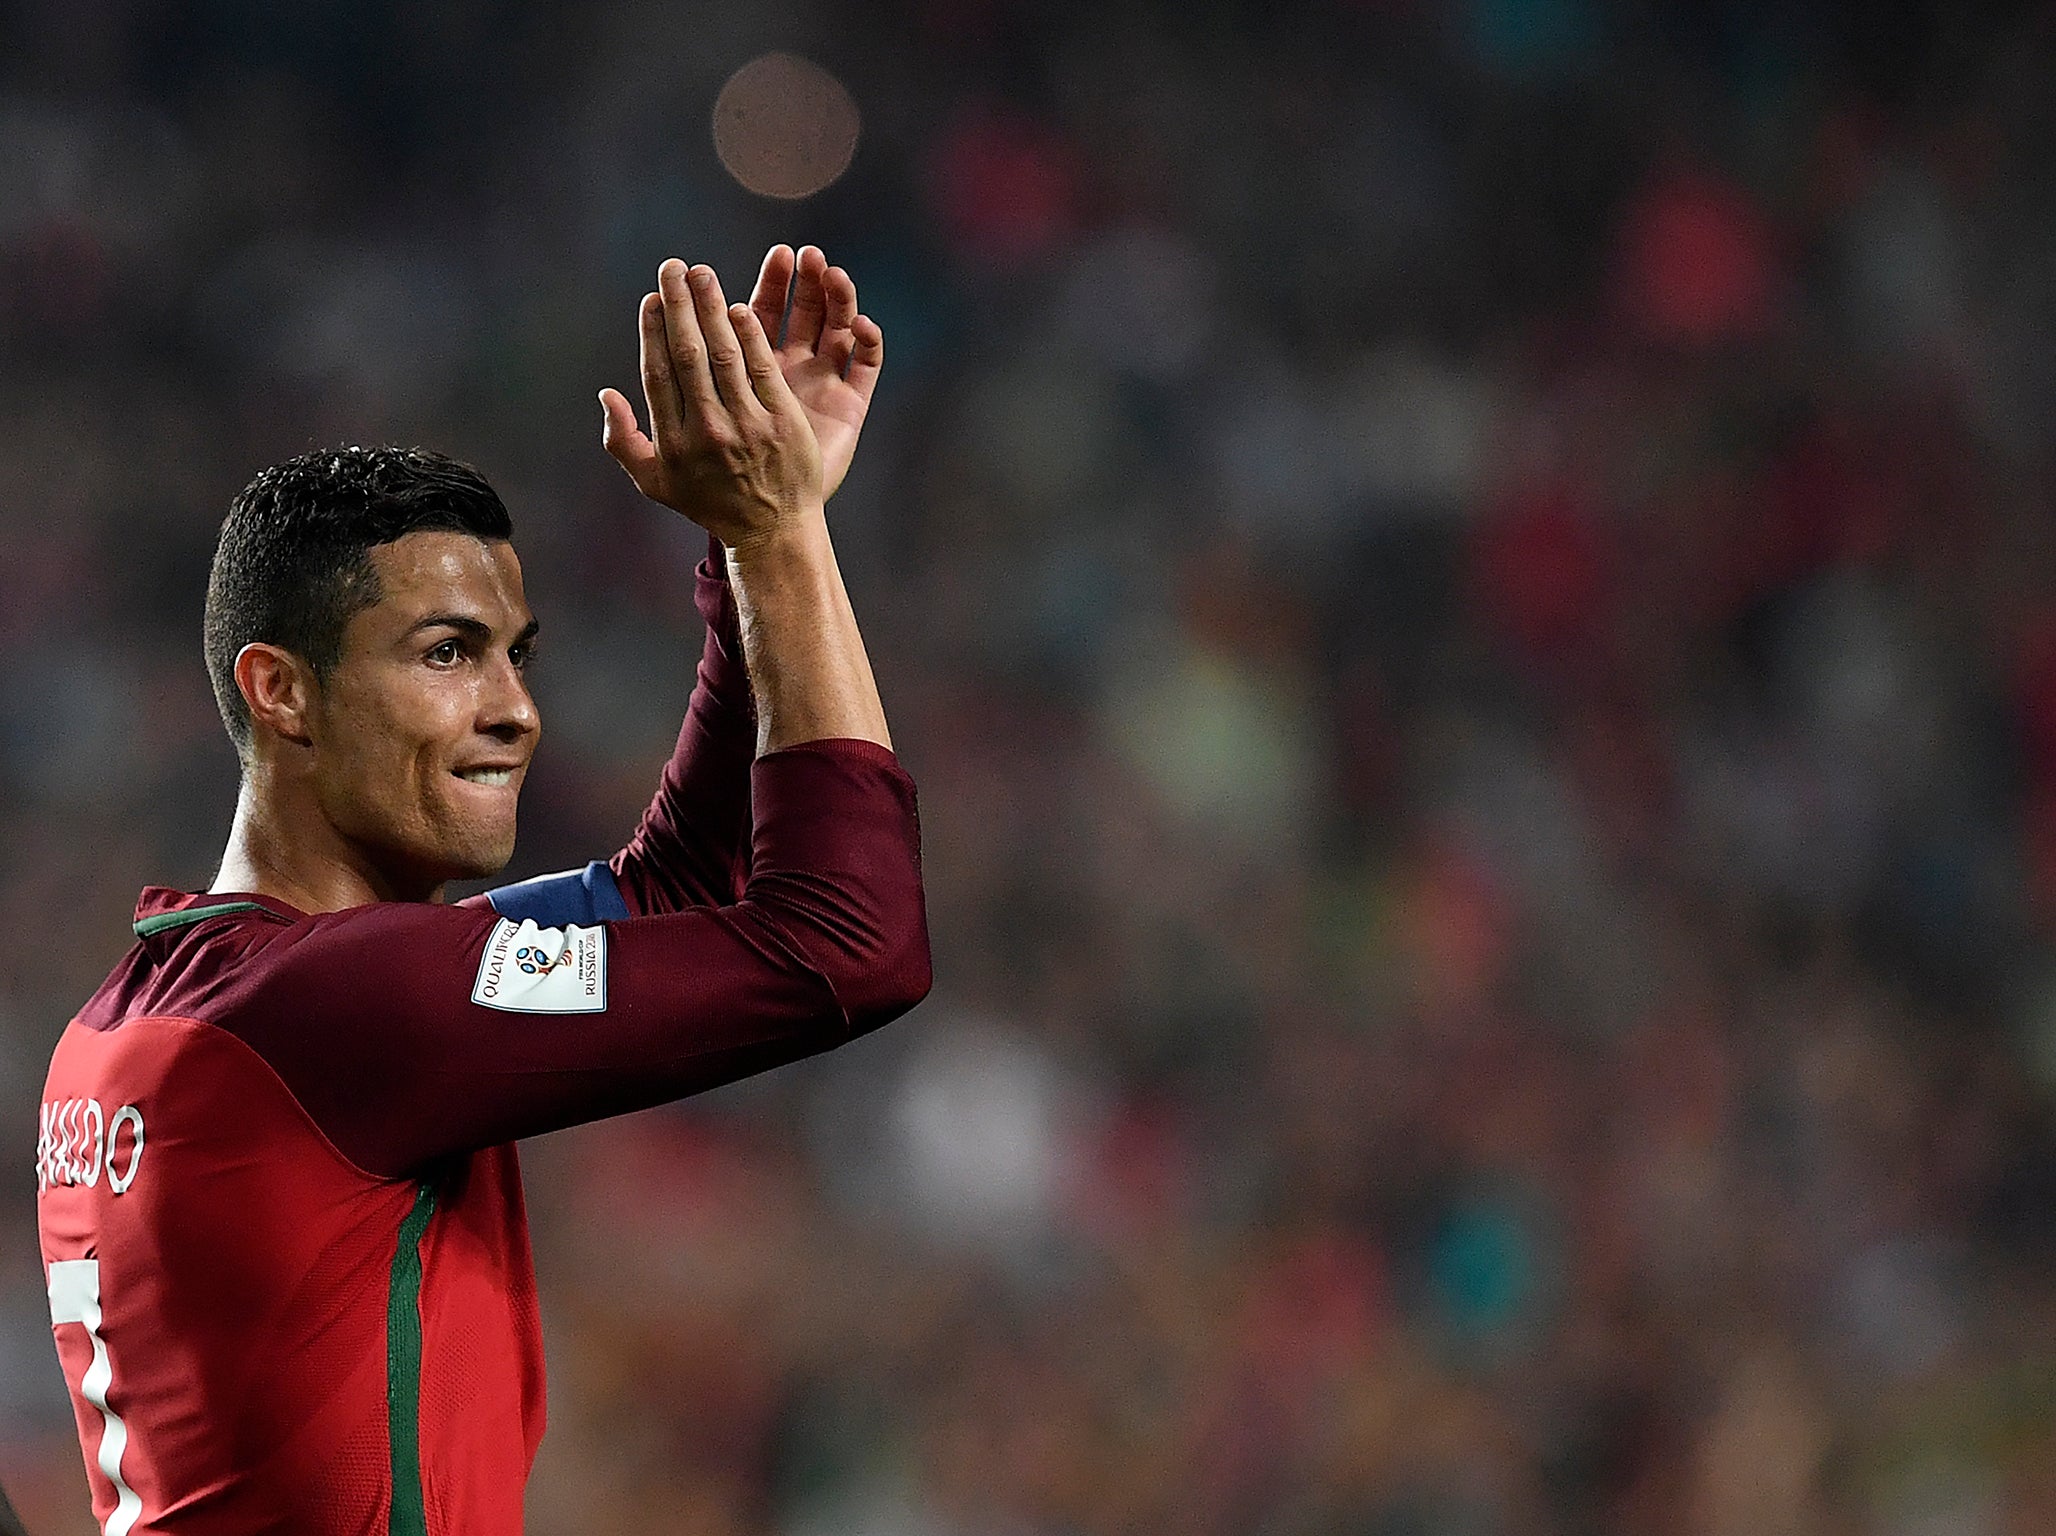 Cristiano Ronaldo's Portugal have made it to the 2018 World Cup